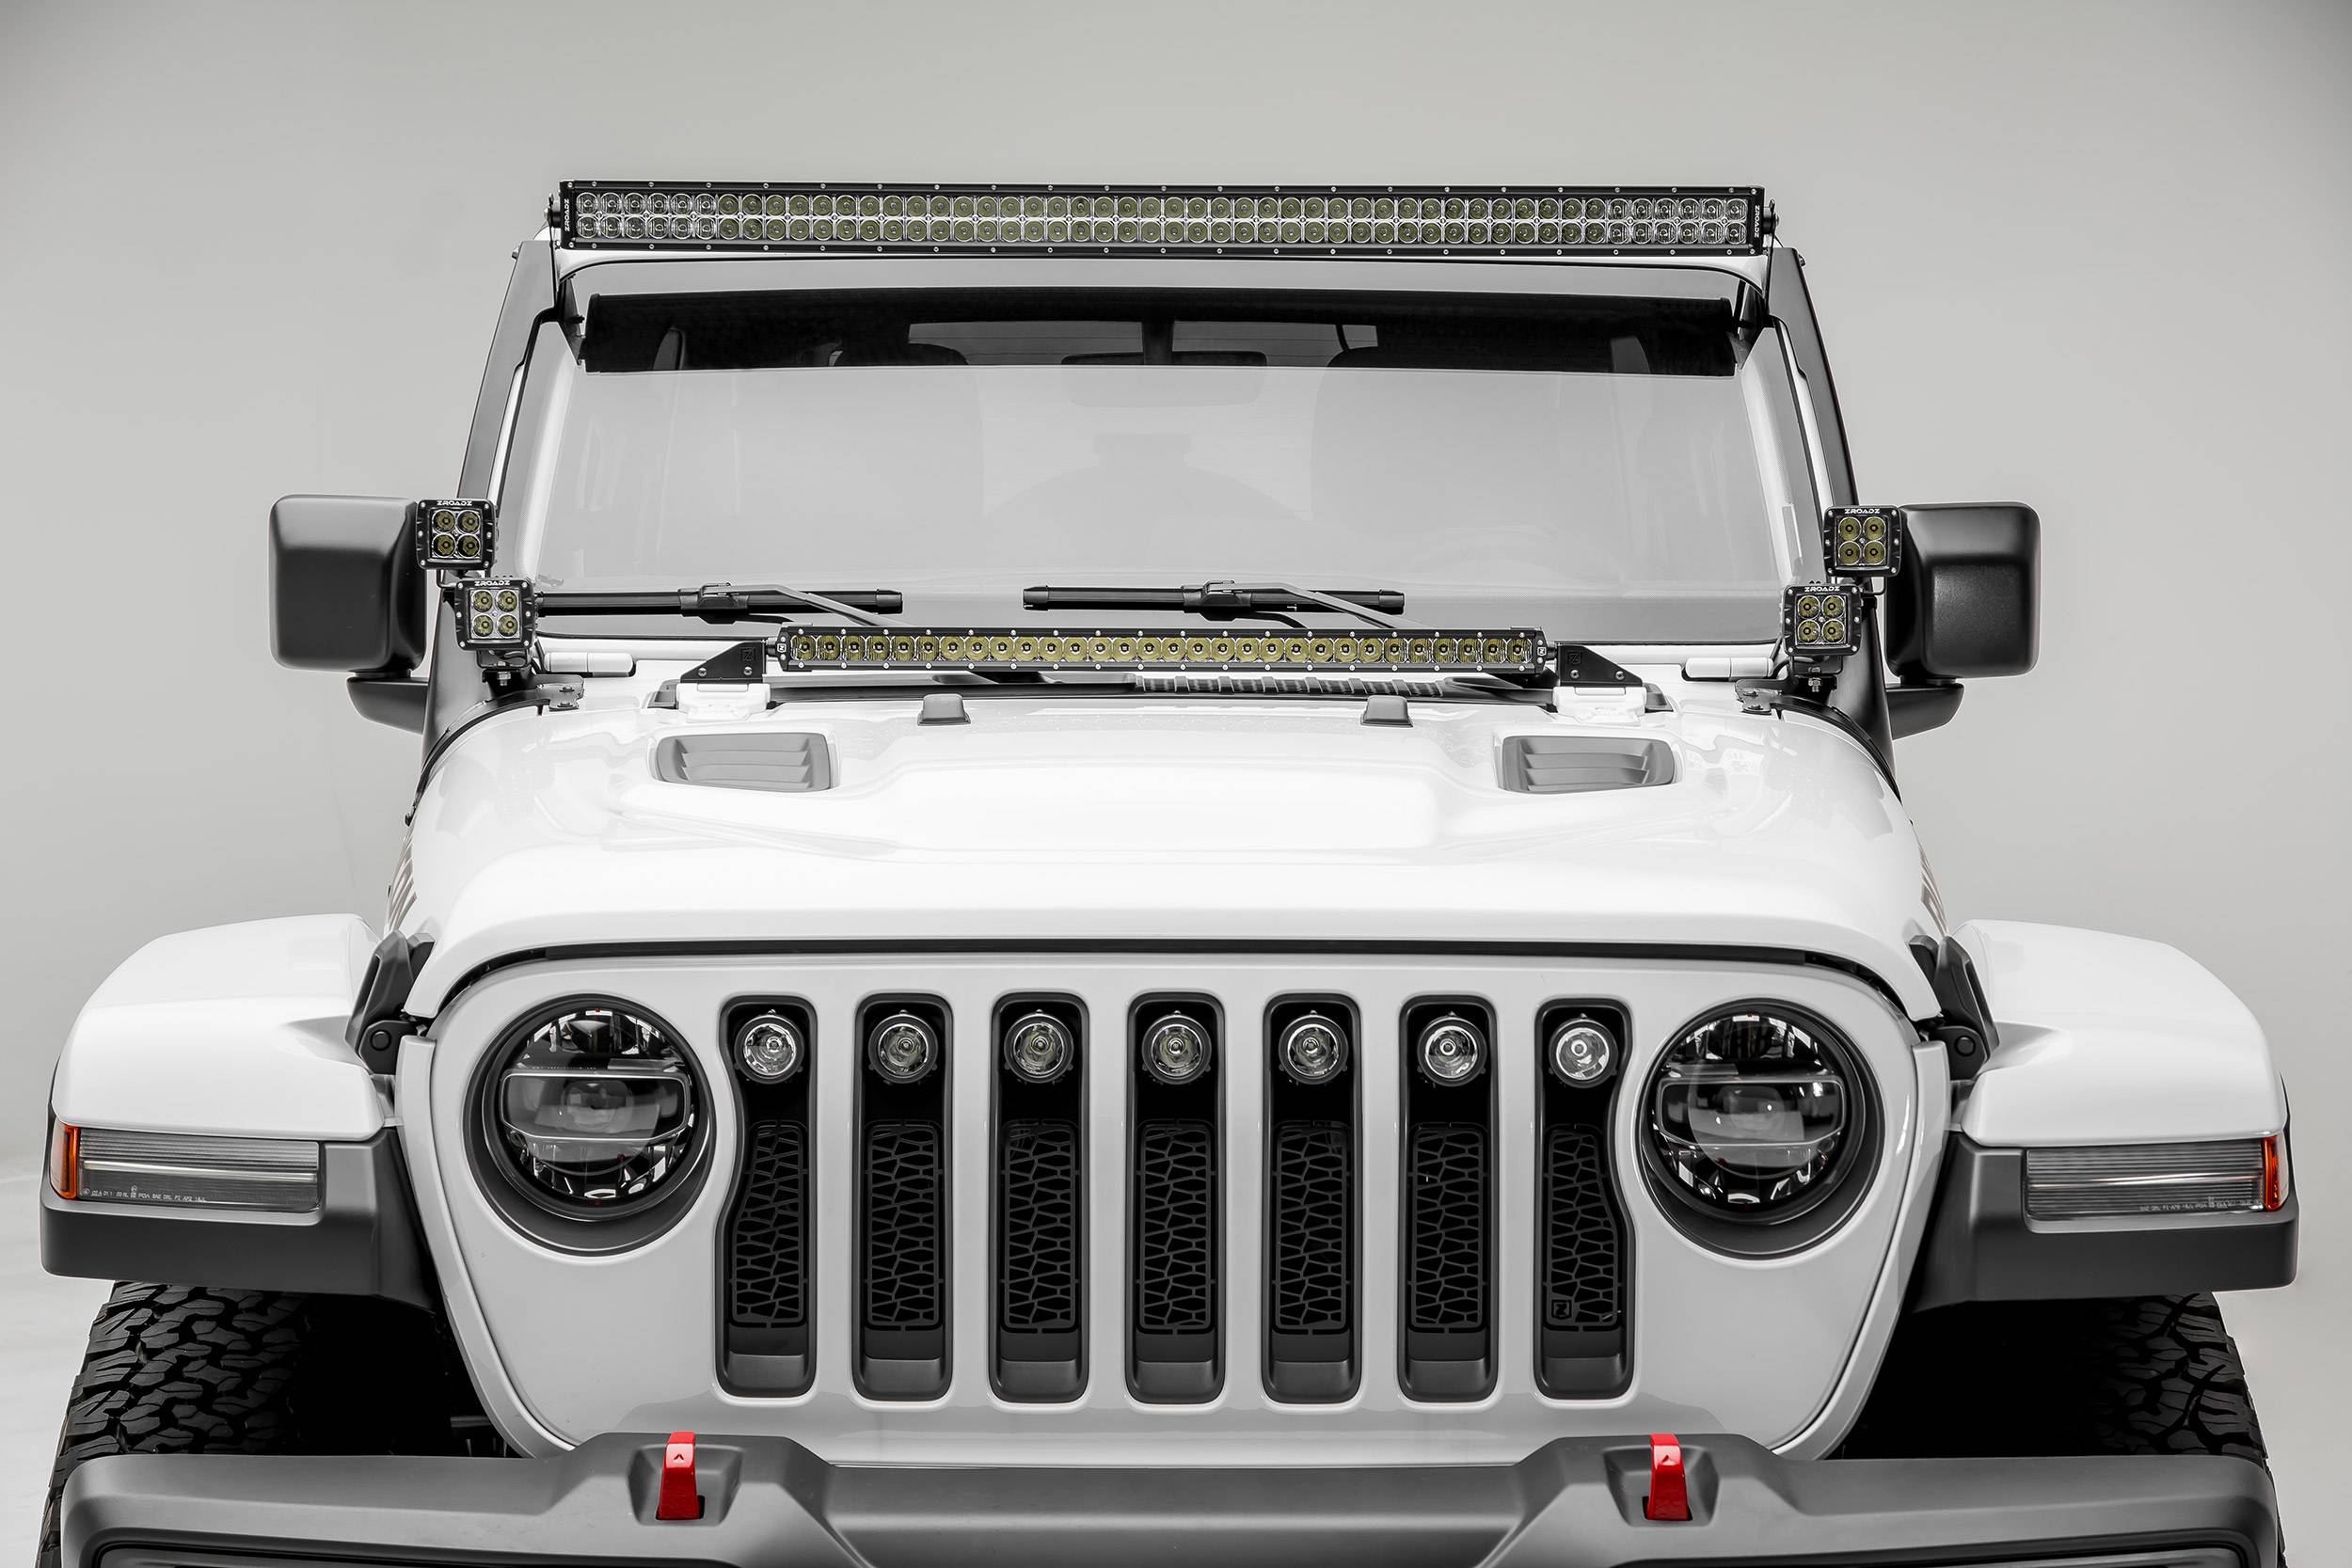 Jeep JL, Gladiator Front Roof LED Bracket to mount (1) 50 or 52 Inch  Staight LED Light Bar and (4) 3 Inch LED Pod Lights - Part # Z374831-BK4